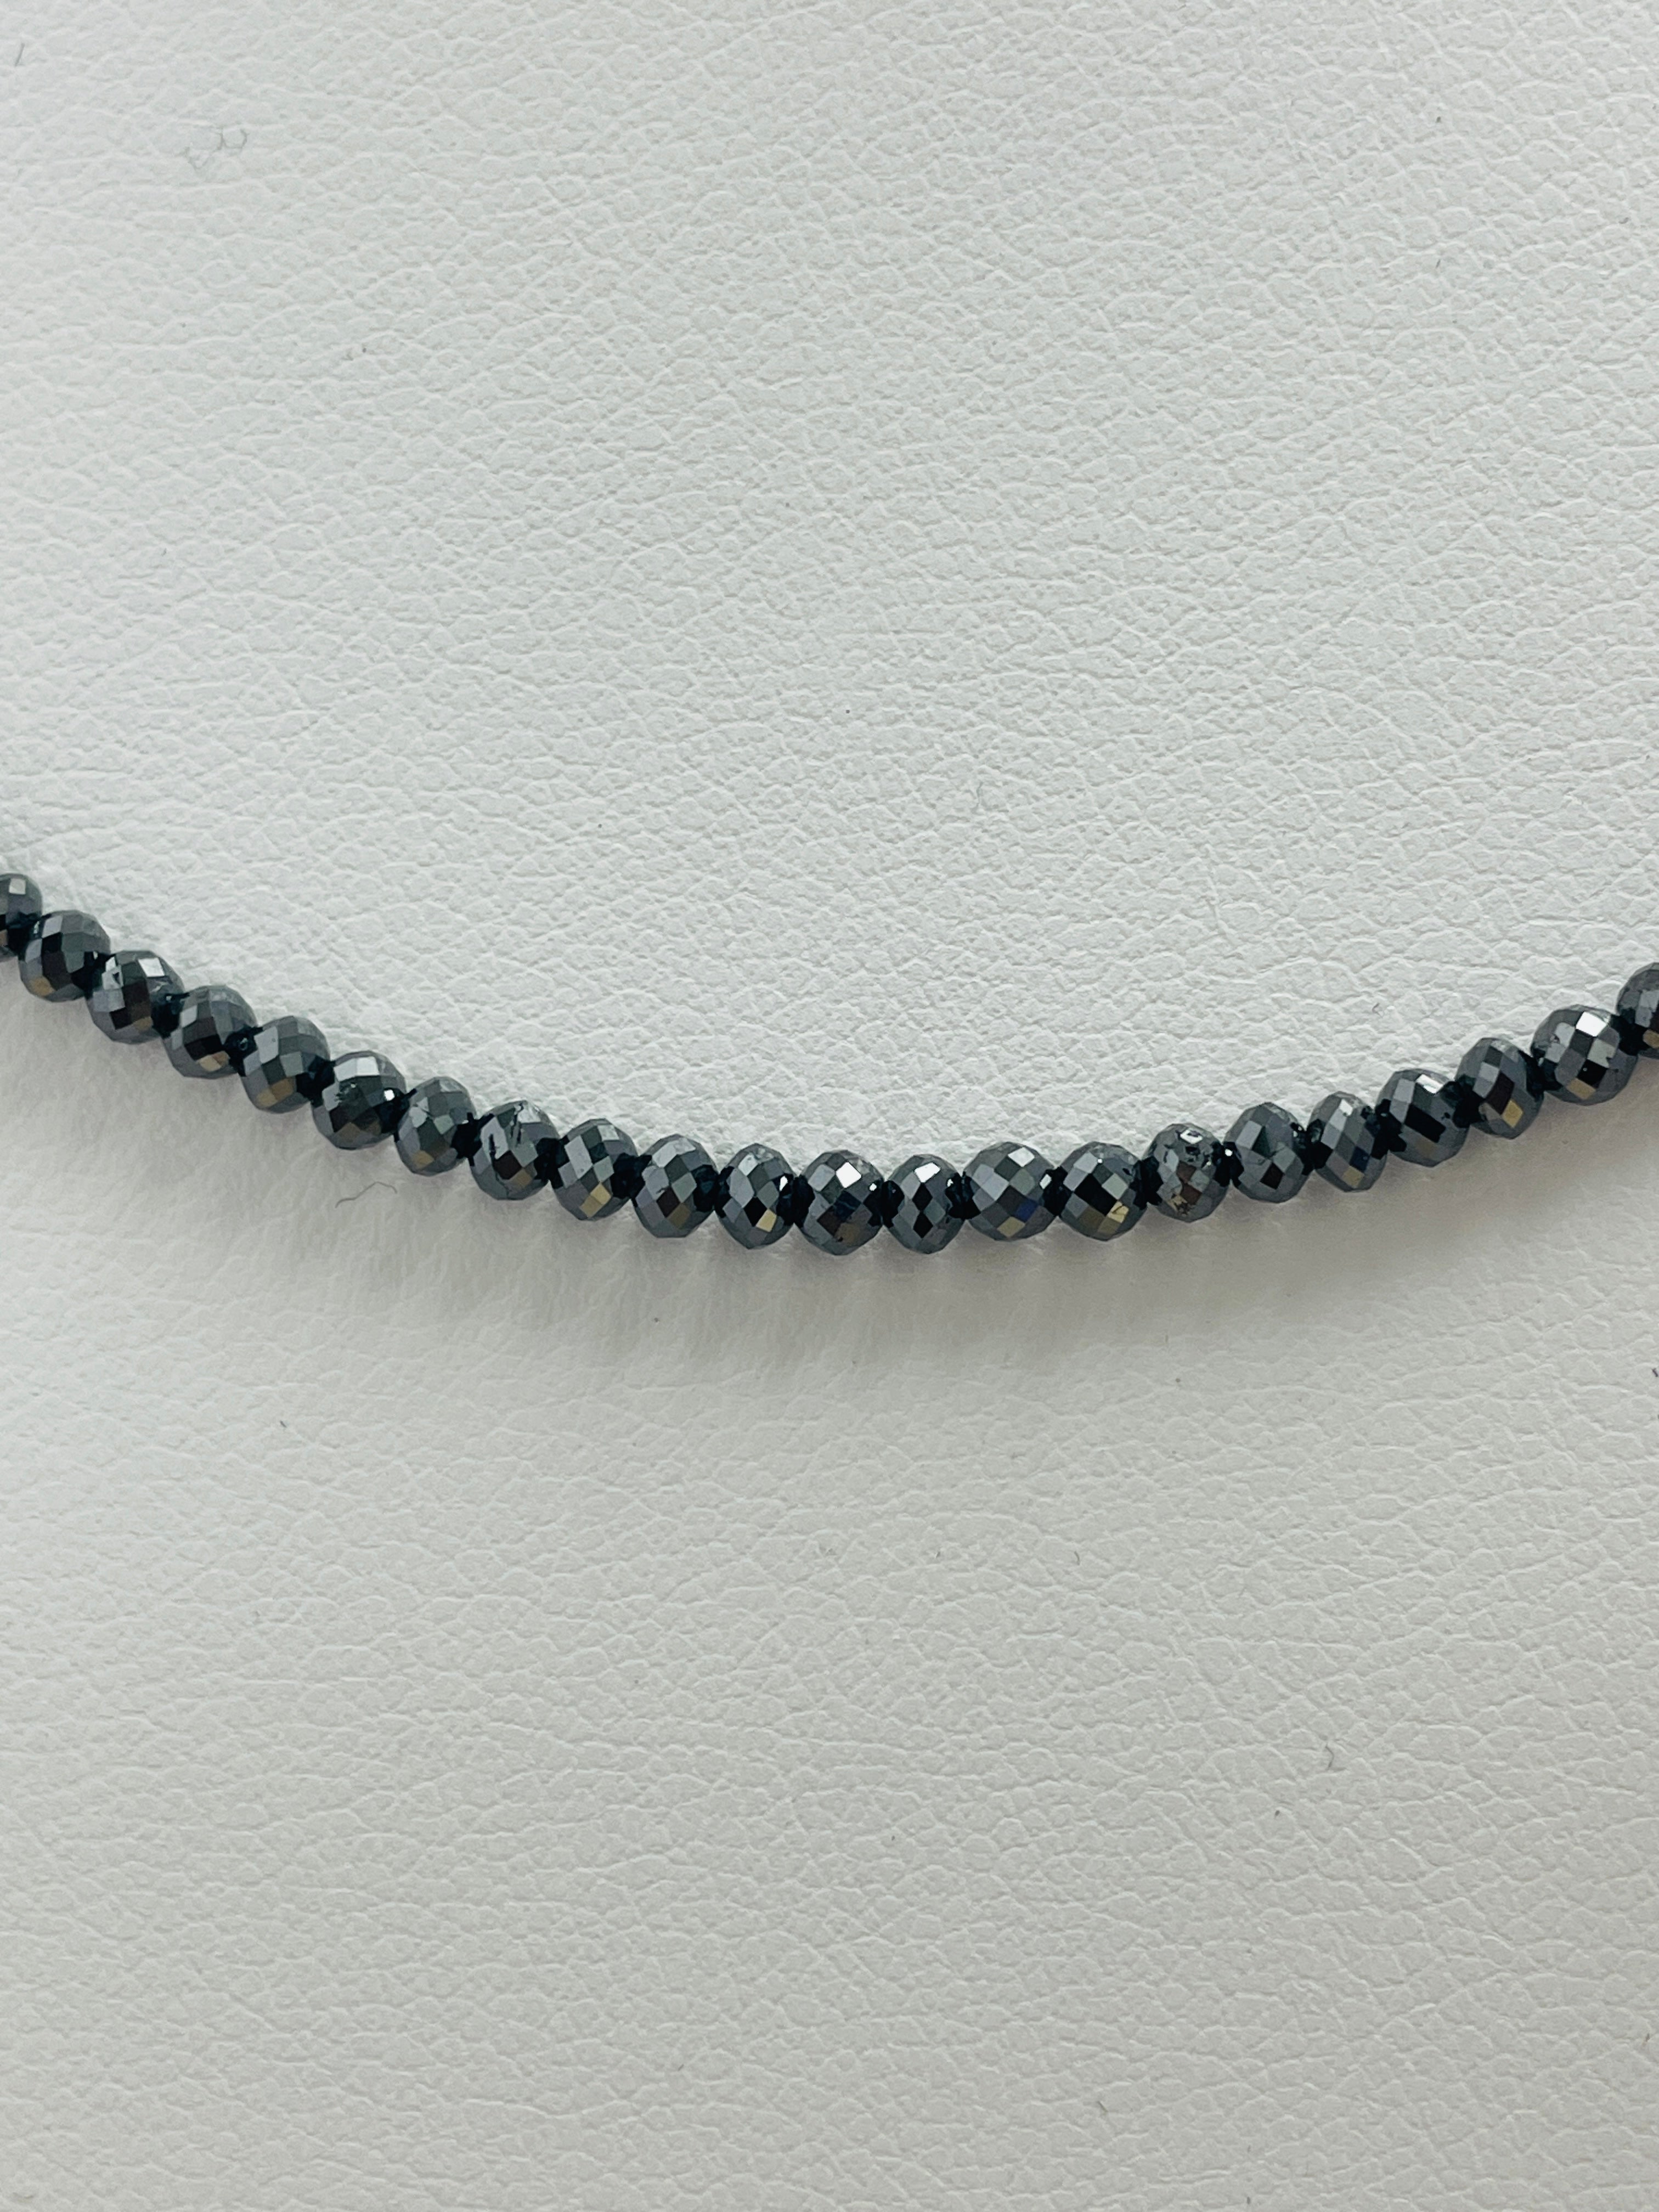 Black Diamond Beads Necklace 17 Inches Made by 18k White Gold